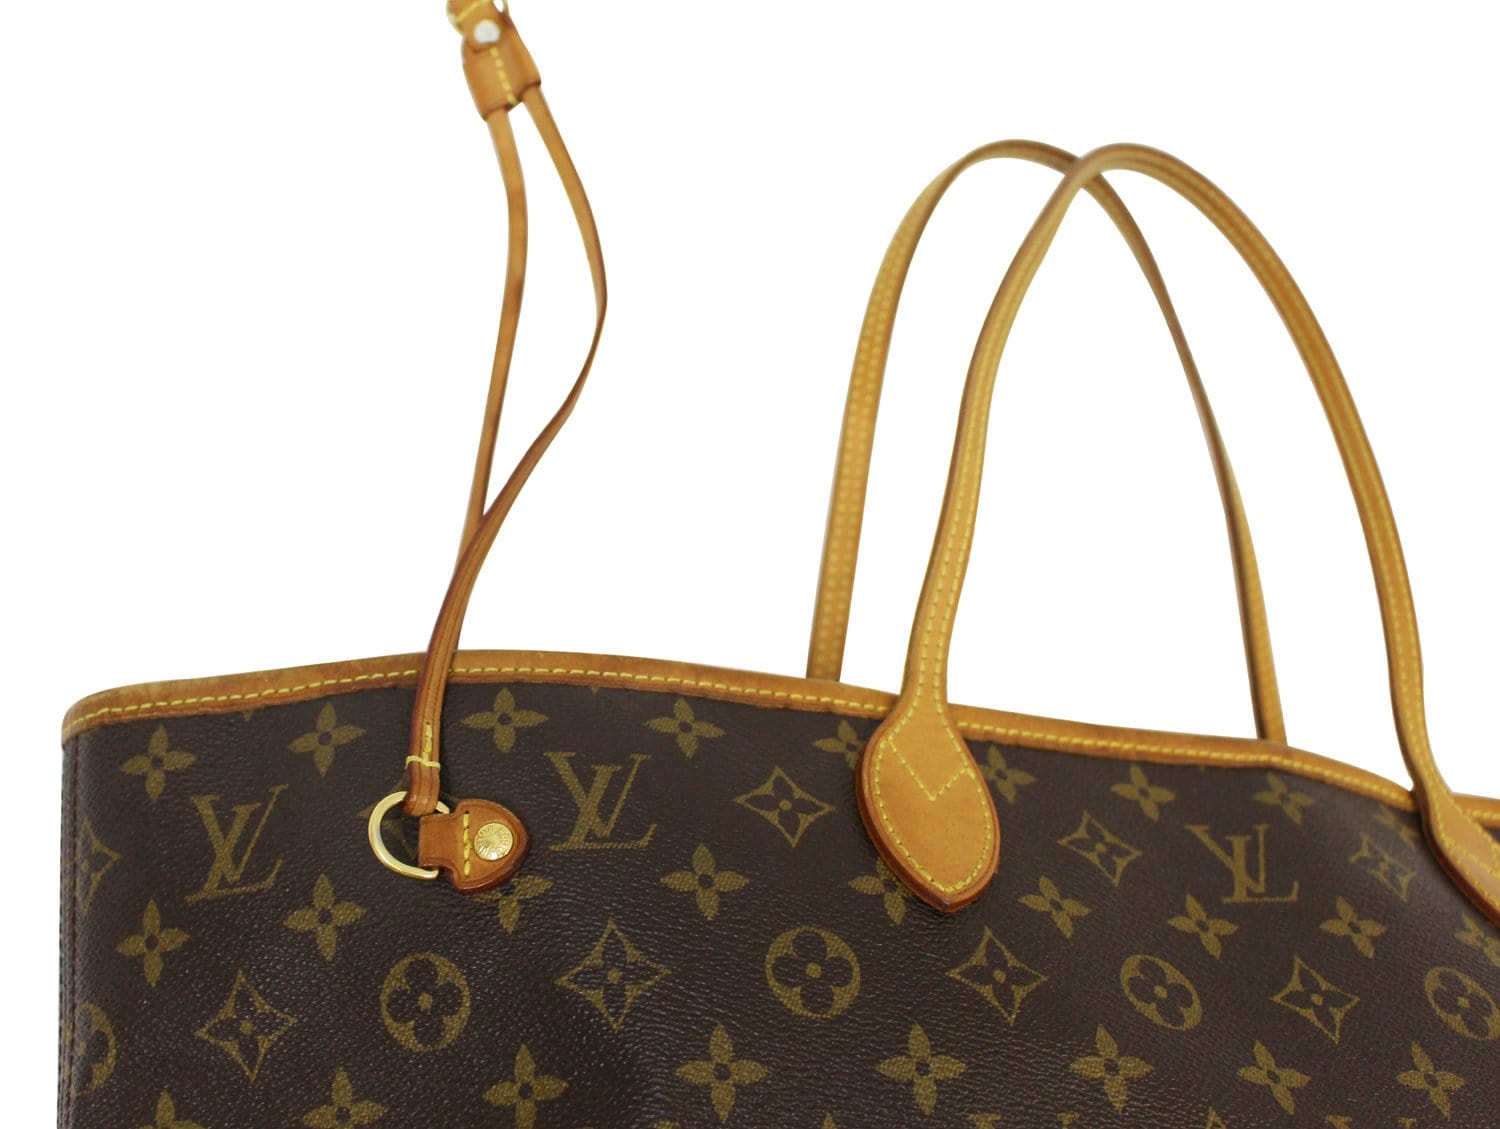 LOUIS VUITTON Pre Owned Tote Bag Monogram Canvas Neverfull GM Brown